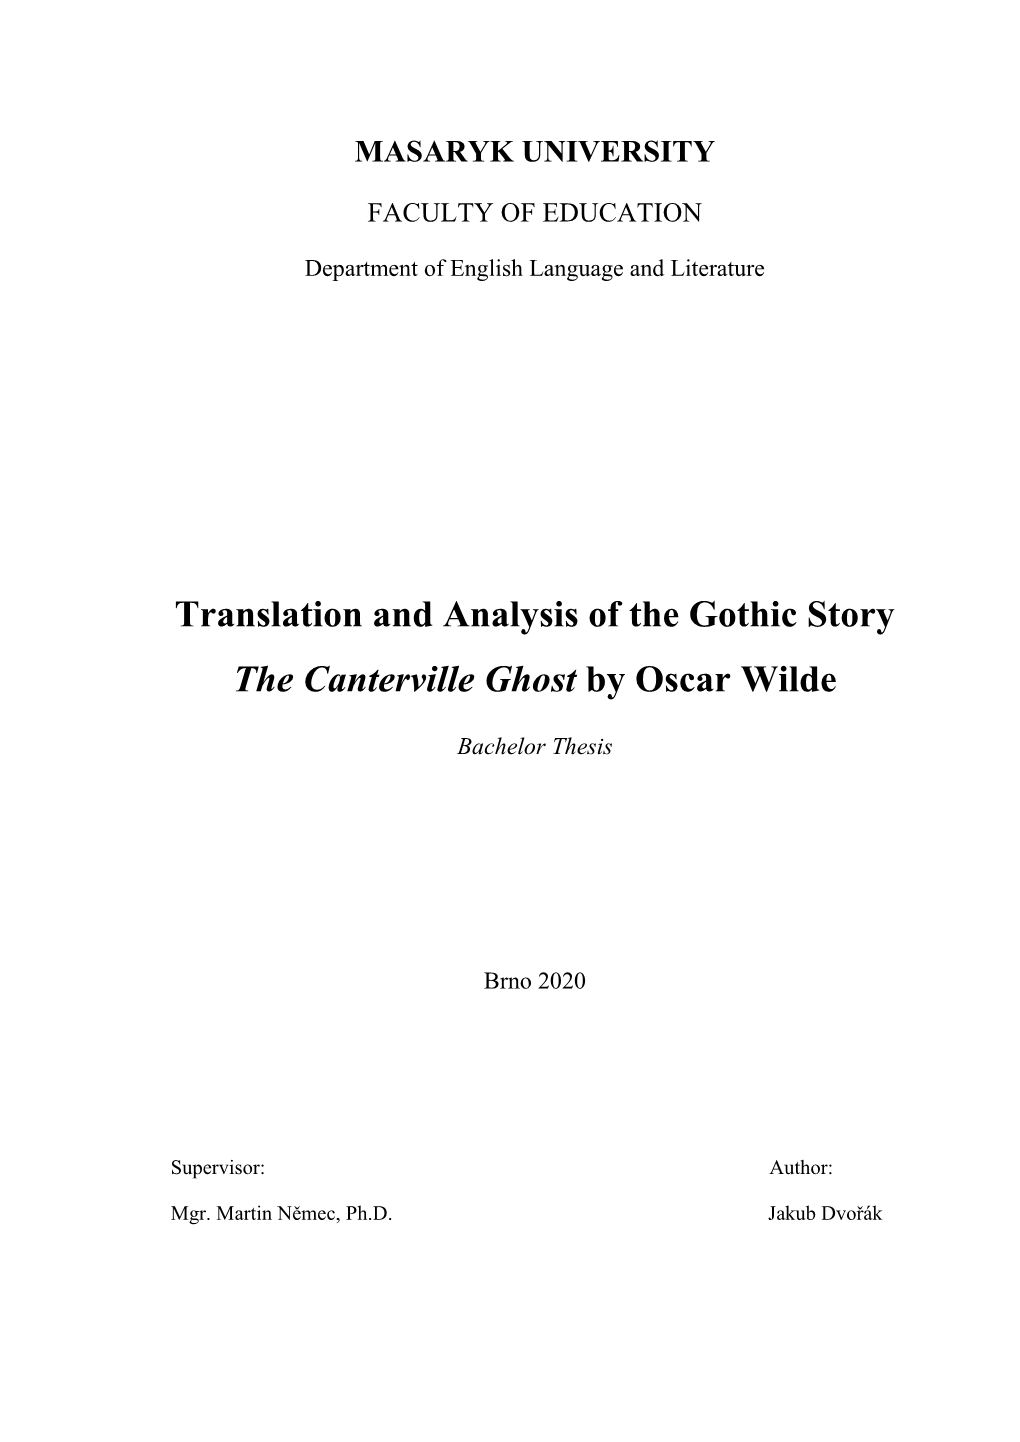 Translation and Analysis of the Gothic Story the Canterville Ghost by Oscar Wilde